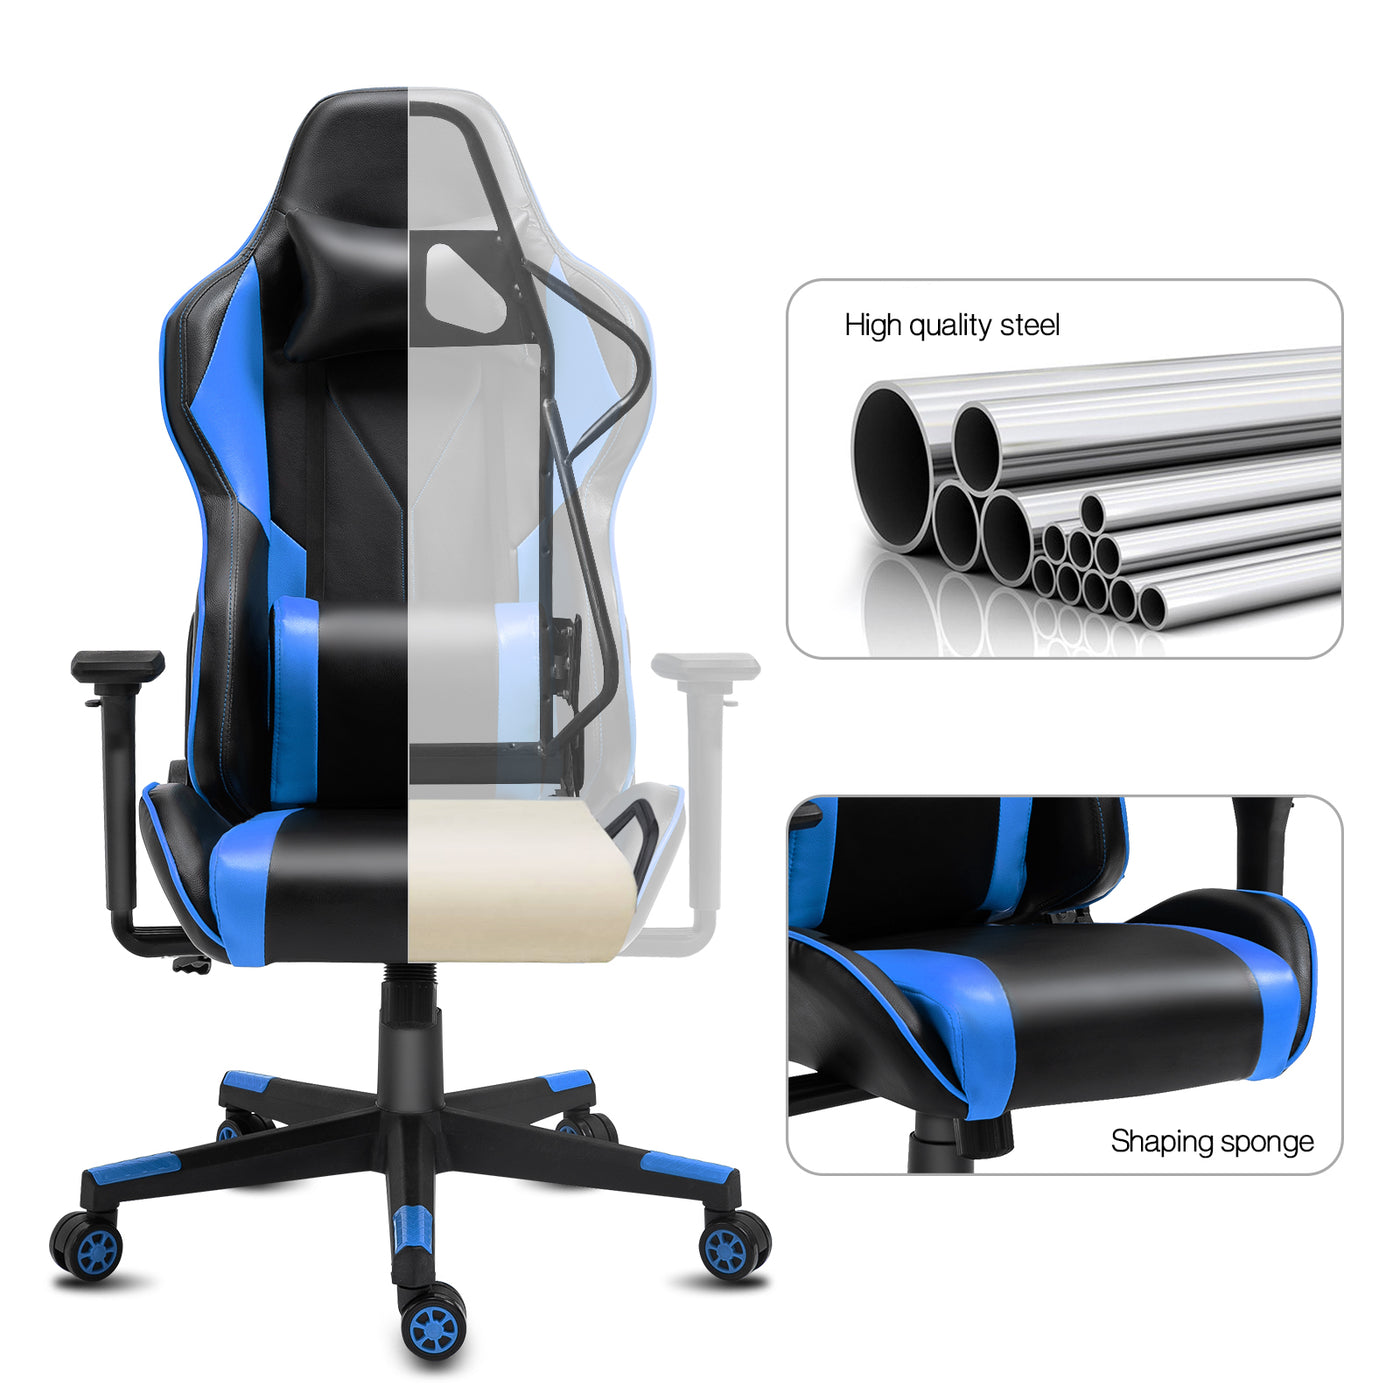 Racing Gaming Chairs Ergonomic Office Computer High Back Chairs Swivel Recliner